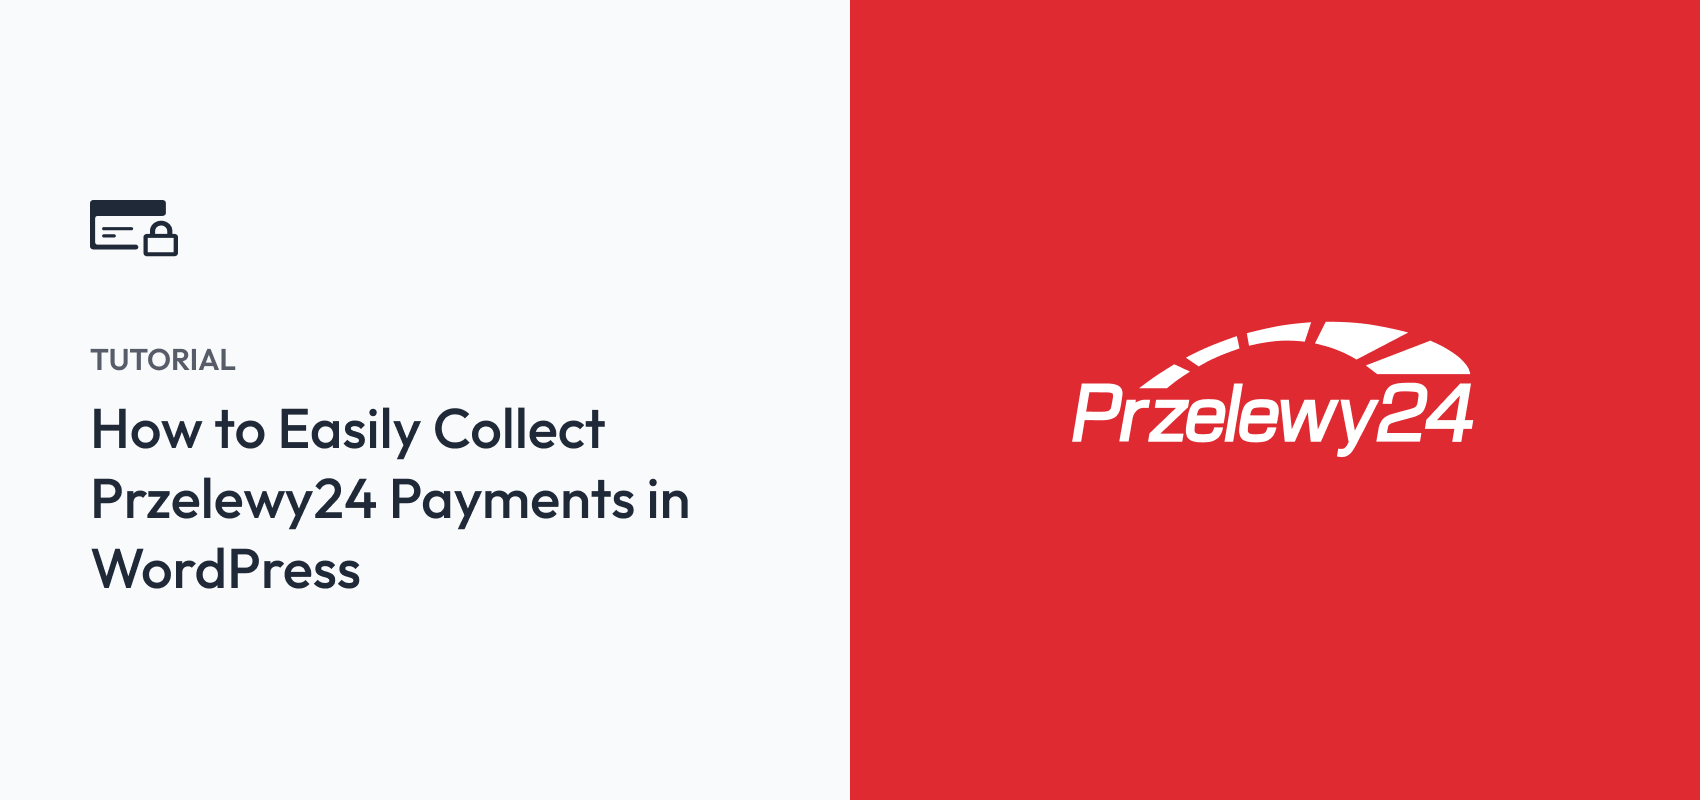 How to Easily Collect Przelewy24 Payments in WordPress